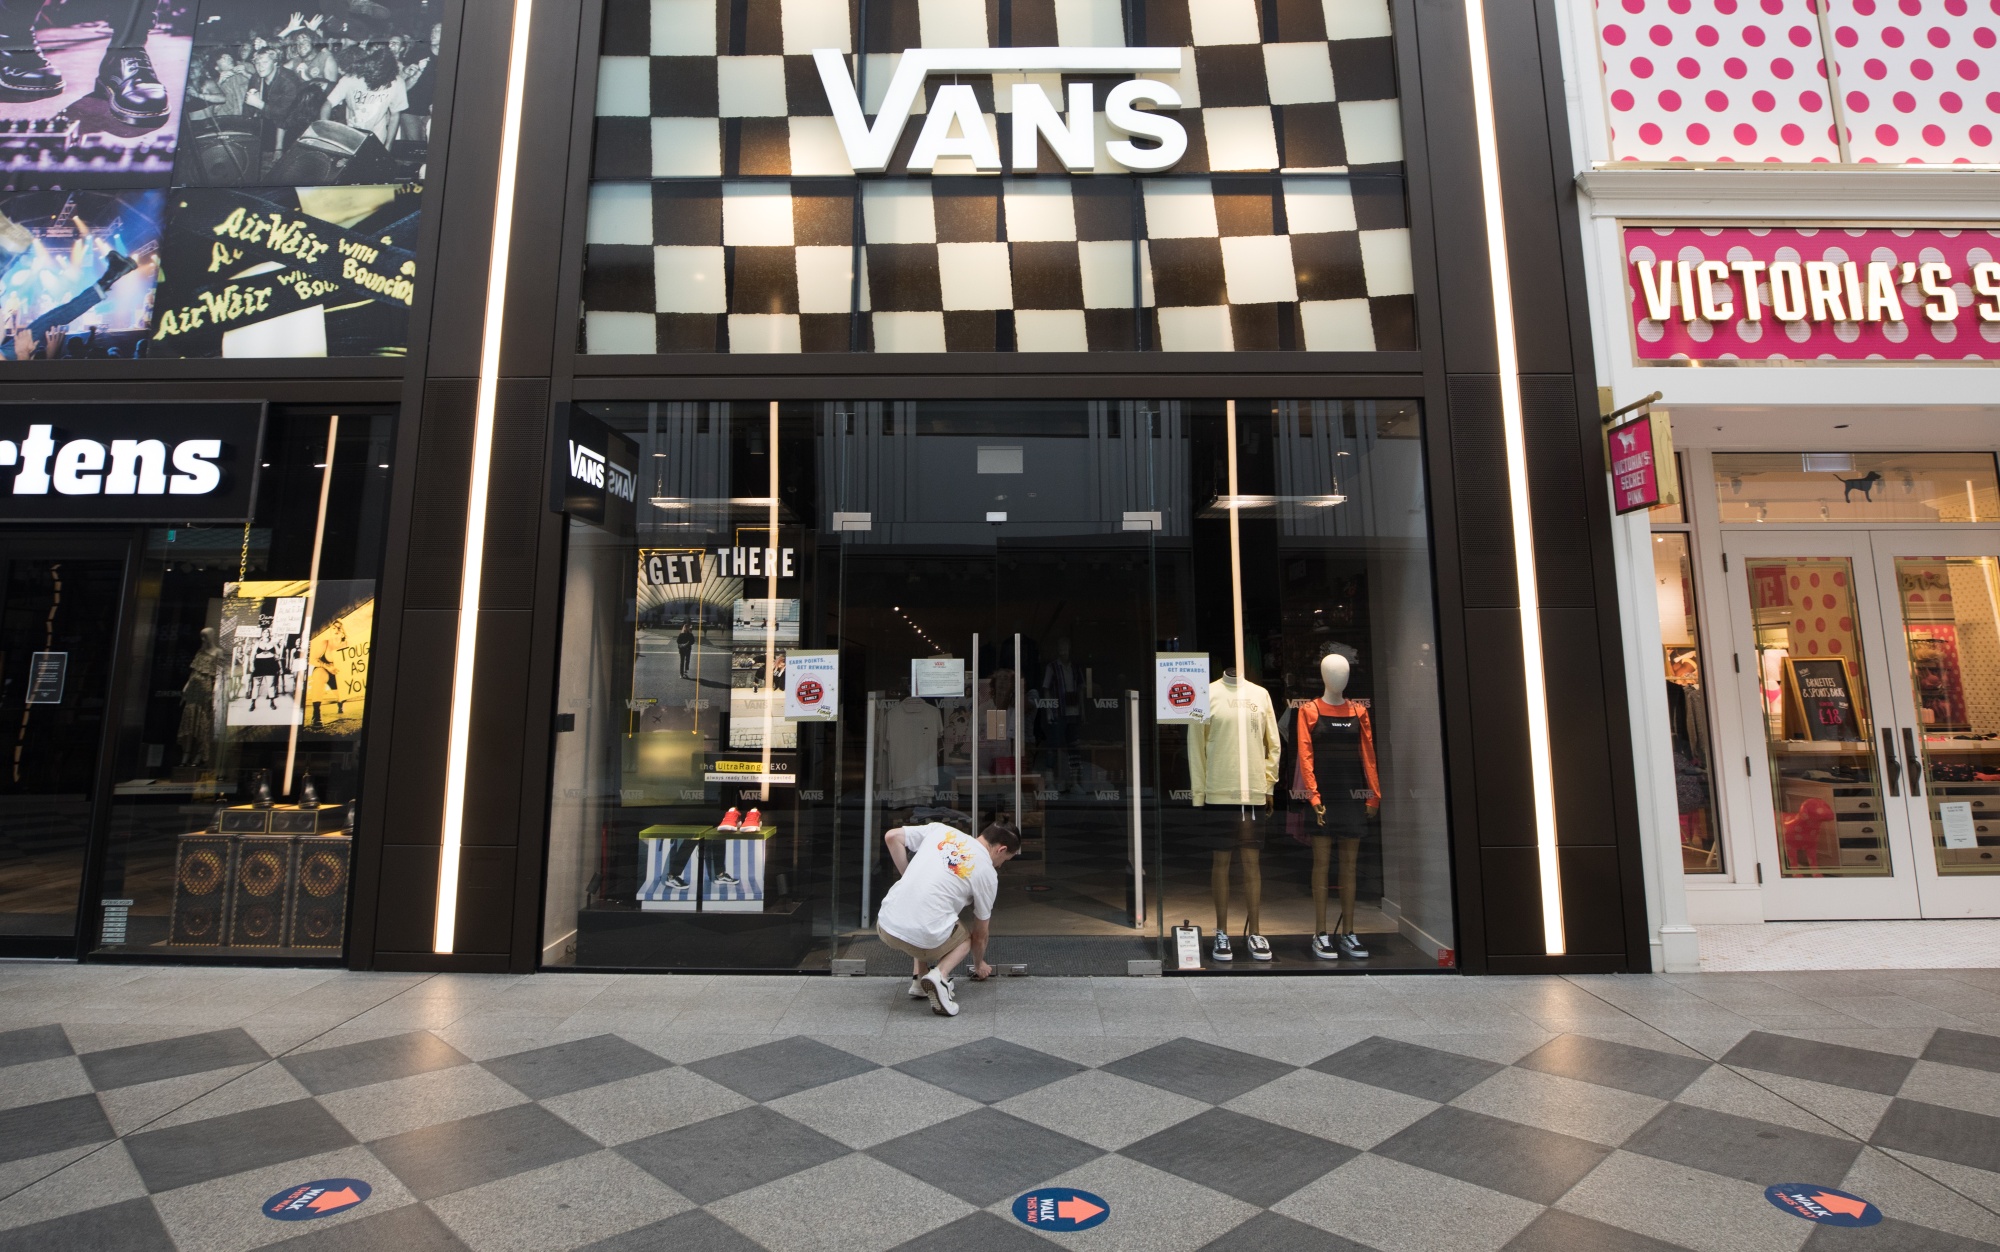 Vans will be a brand leader for VF Corp. after jeans spin-off